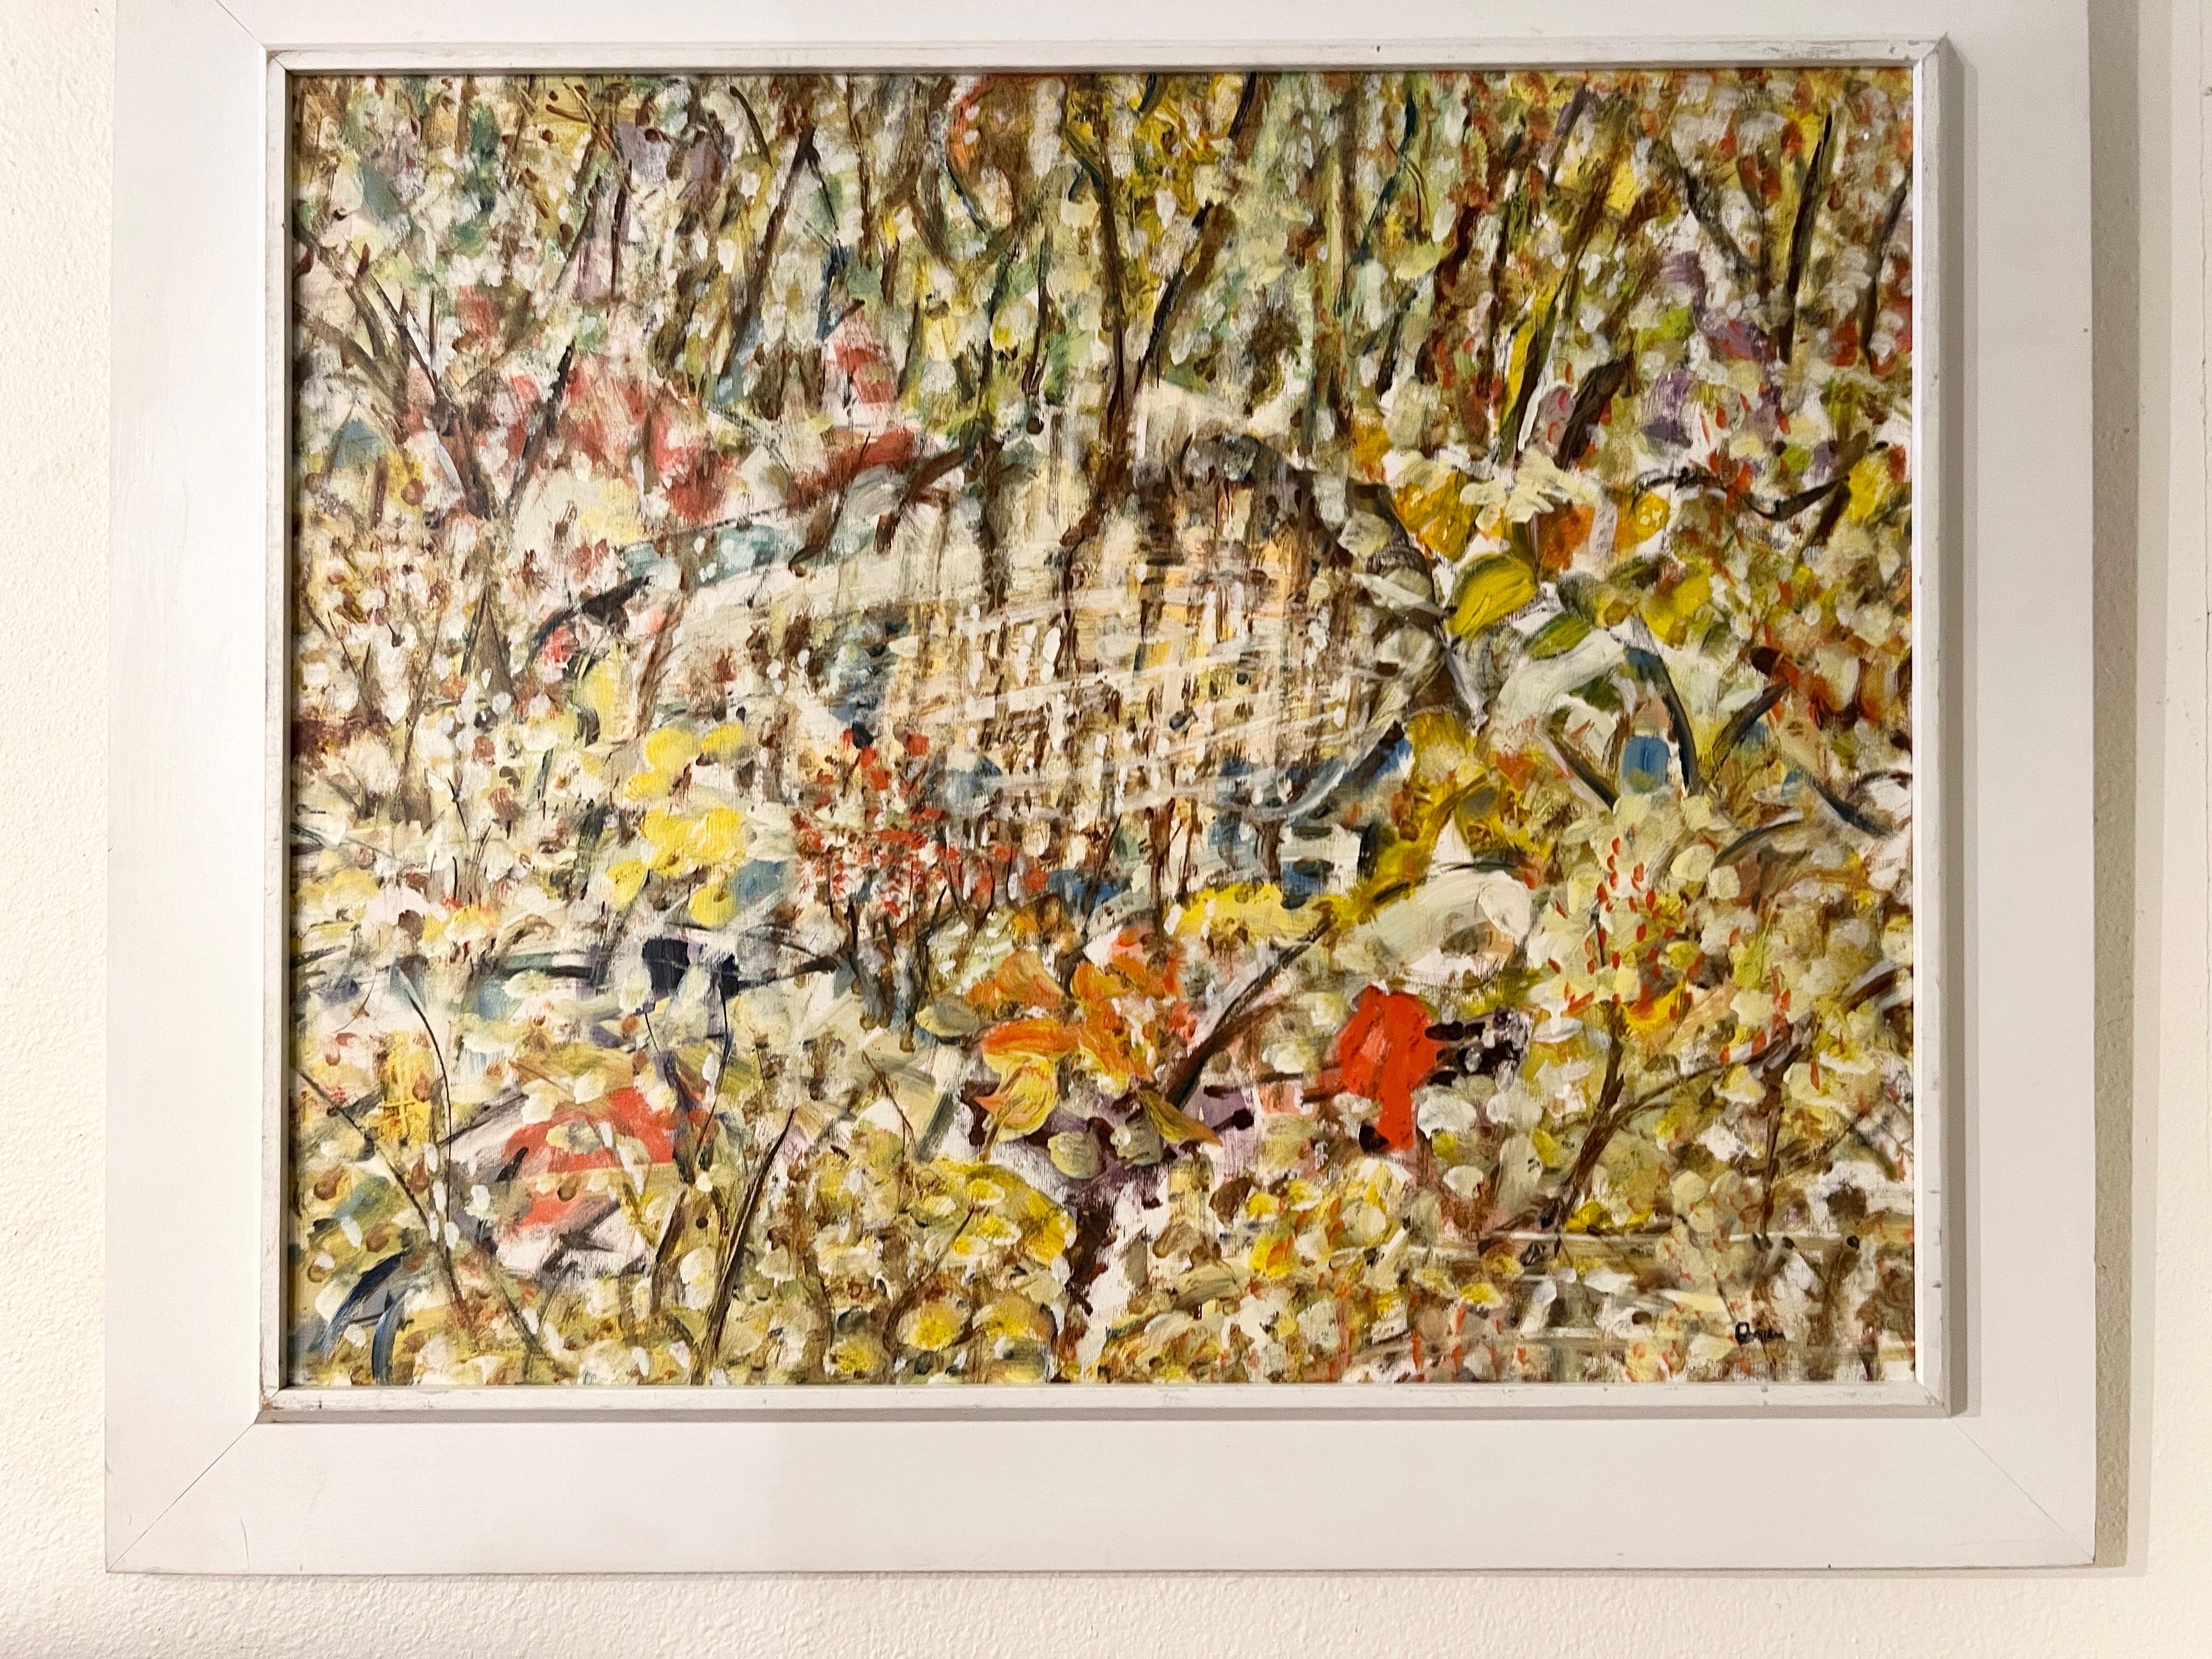 In Arthur Pinajian's mesmerizing 1986 oil painting, a lush symphony of nature unfolds on the canvas. The artist's distinctive brushstroke techniques breathe life into the scenery of a serene forest, located in the heart of Bellport, New York. The